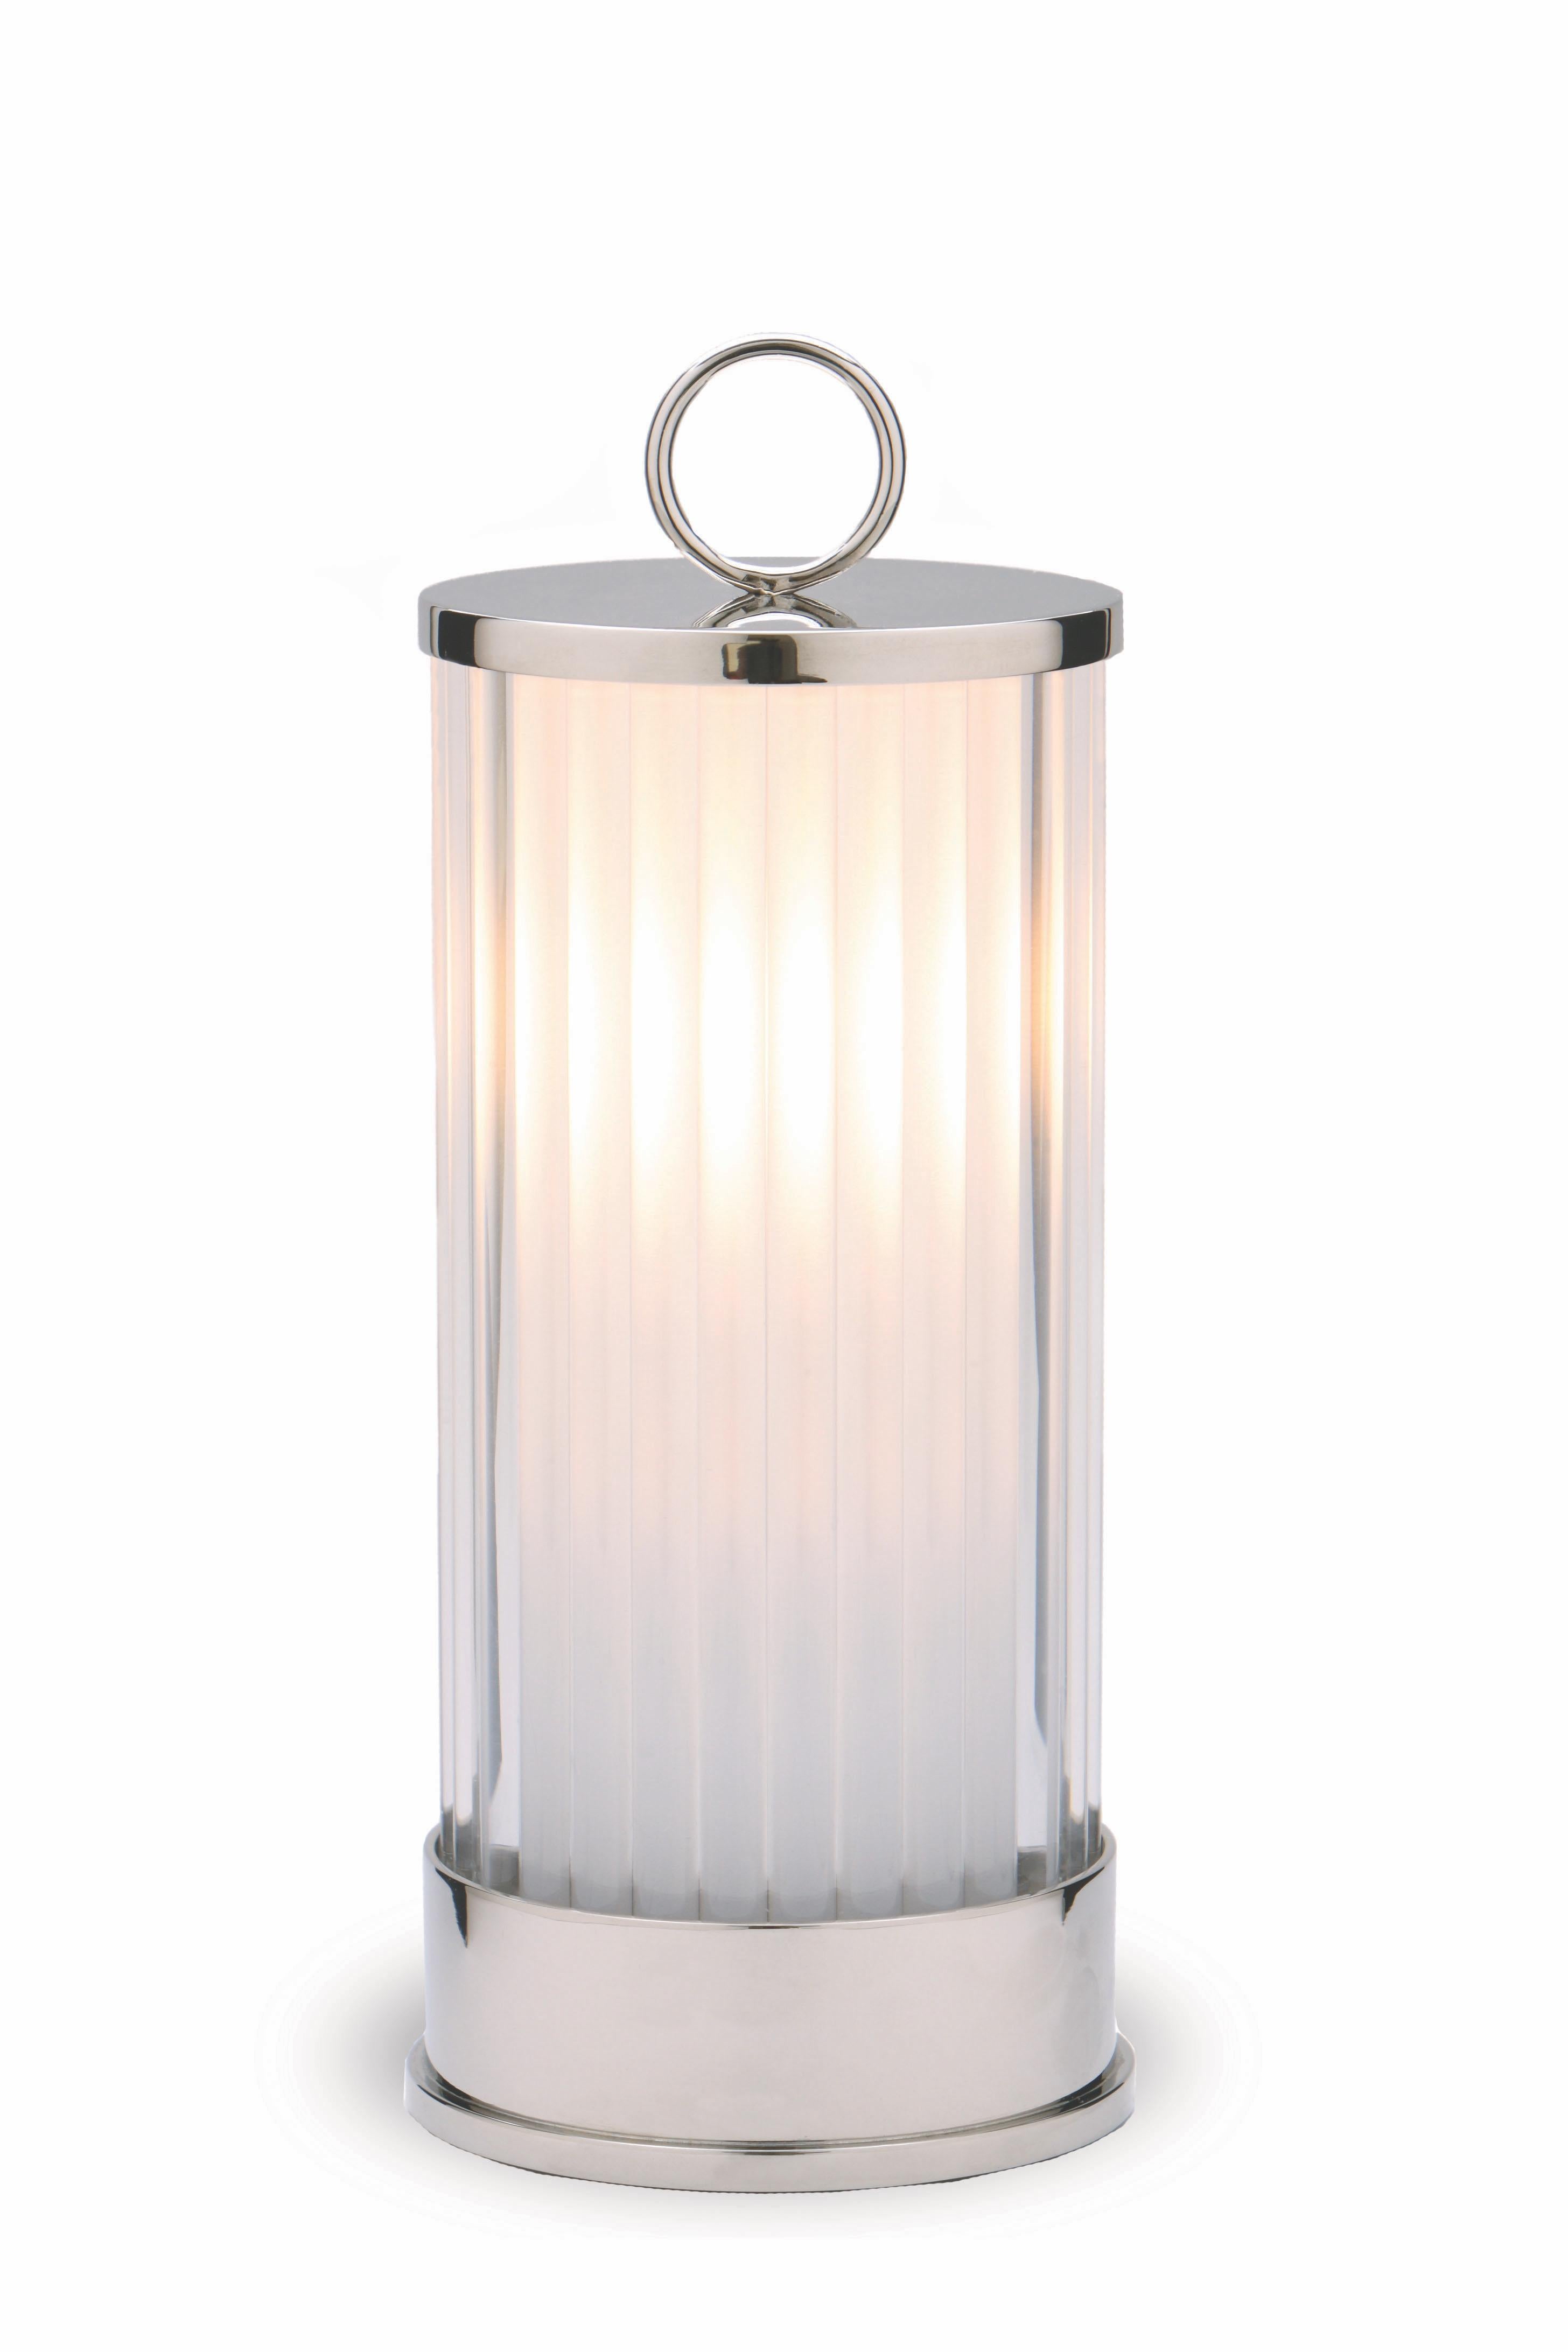 The Acorn lantern is made of silver-plated brass with an enclosed light source that provides a soft glow. 

The lantern is illuminated by LEDs and powered by 2 AA batteries (not included) allowing it to be easily used throughout a space.